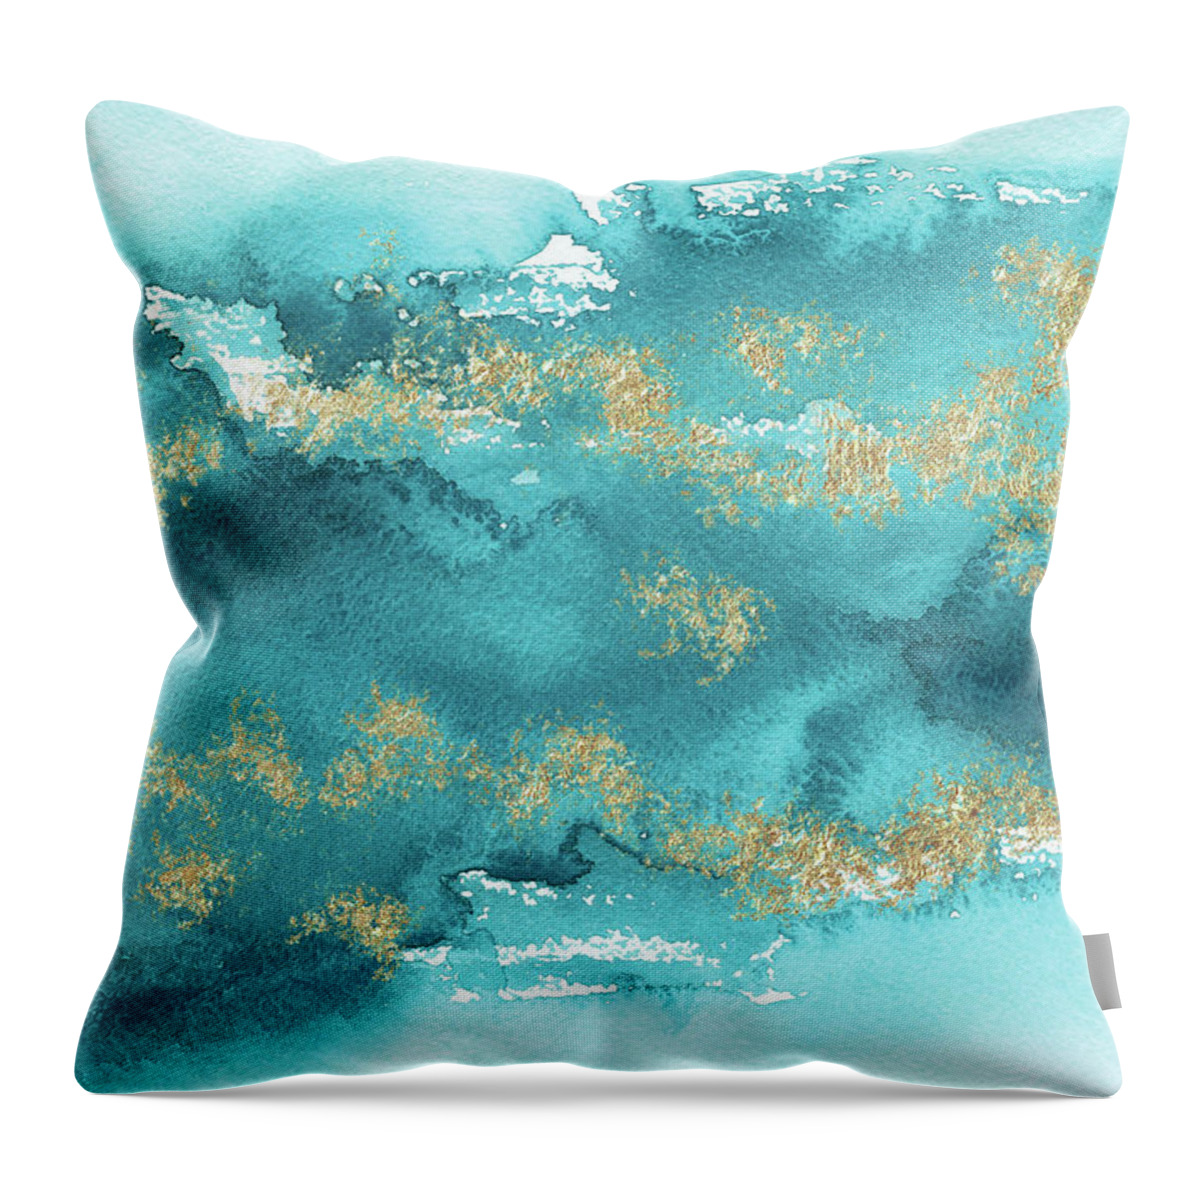 Turquoise Blue Throw Pillow featuring the painting Turquoise Blue, Gold And Aquamarine by Garden Of Delights